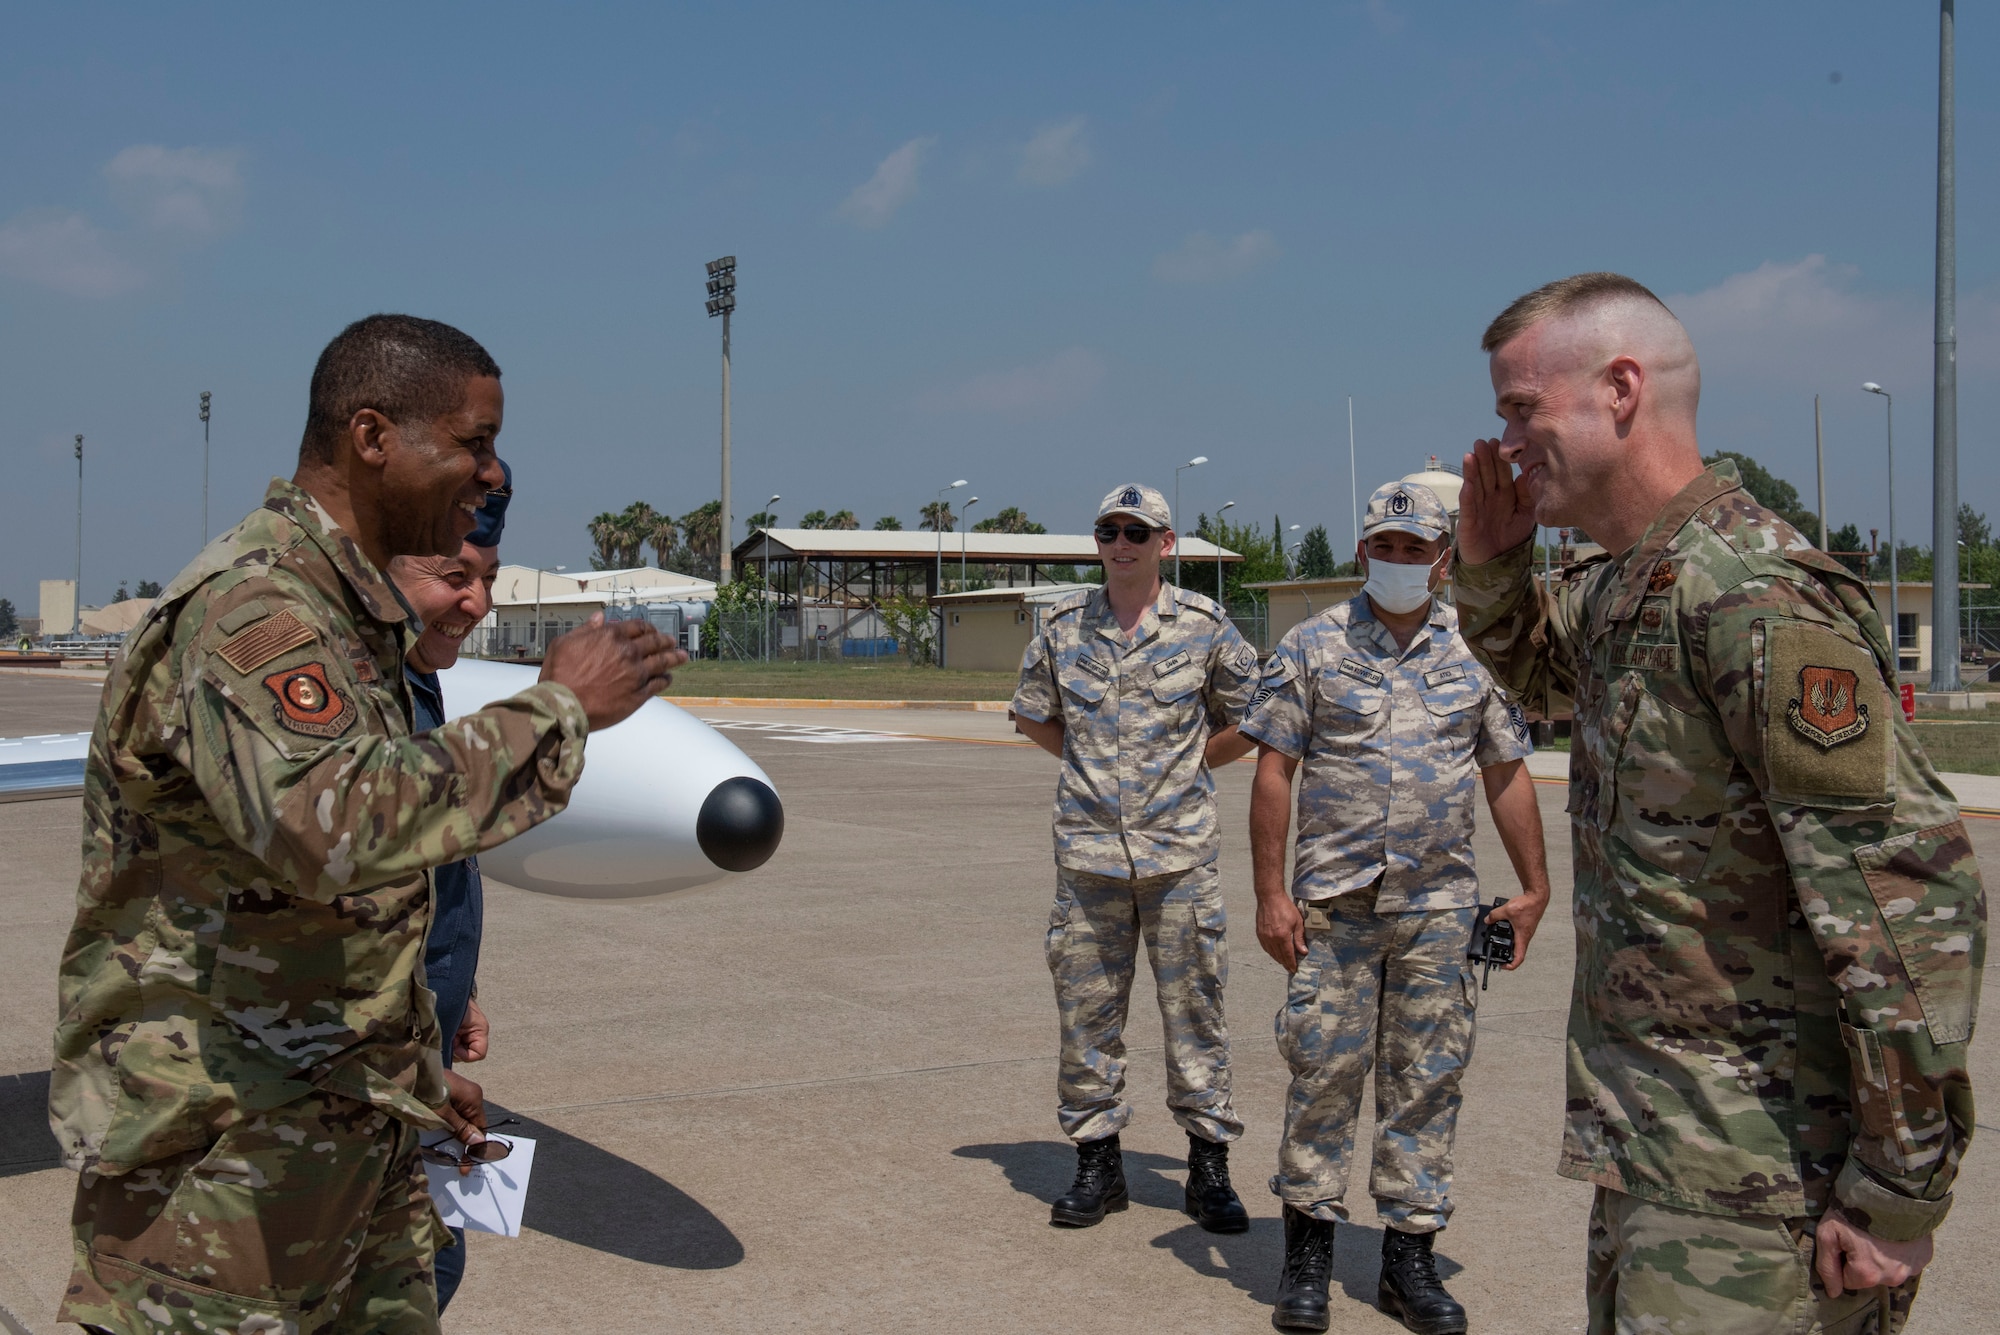 U.S. Air Force Maj. Gen. Randall Reed, 3rd Air Force commander, greets U.S. Air Force Col. Randy Oakland, 39th Air Base Wing commander during a visit to Incirlik Air Base, Turkey. Reed arrived at Incirlik to visit U.S. Airmen and check on their well-being. (U.S. Air Force photo by Staff Sgt. Joshua Magbanua)